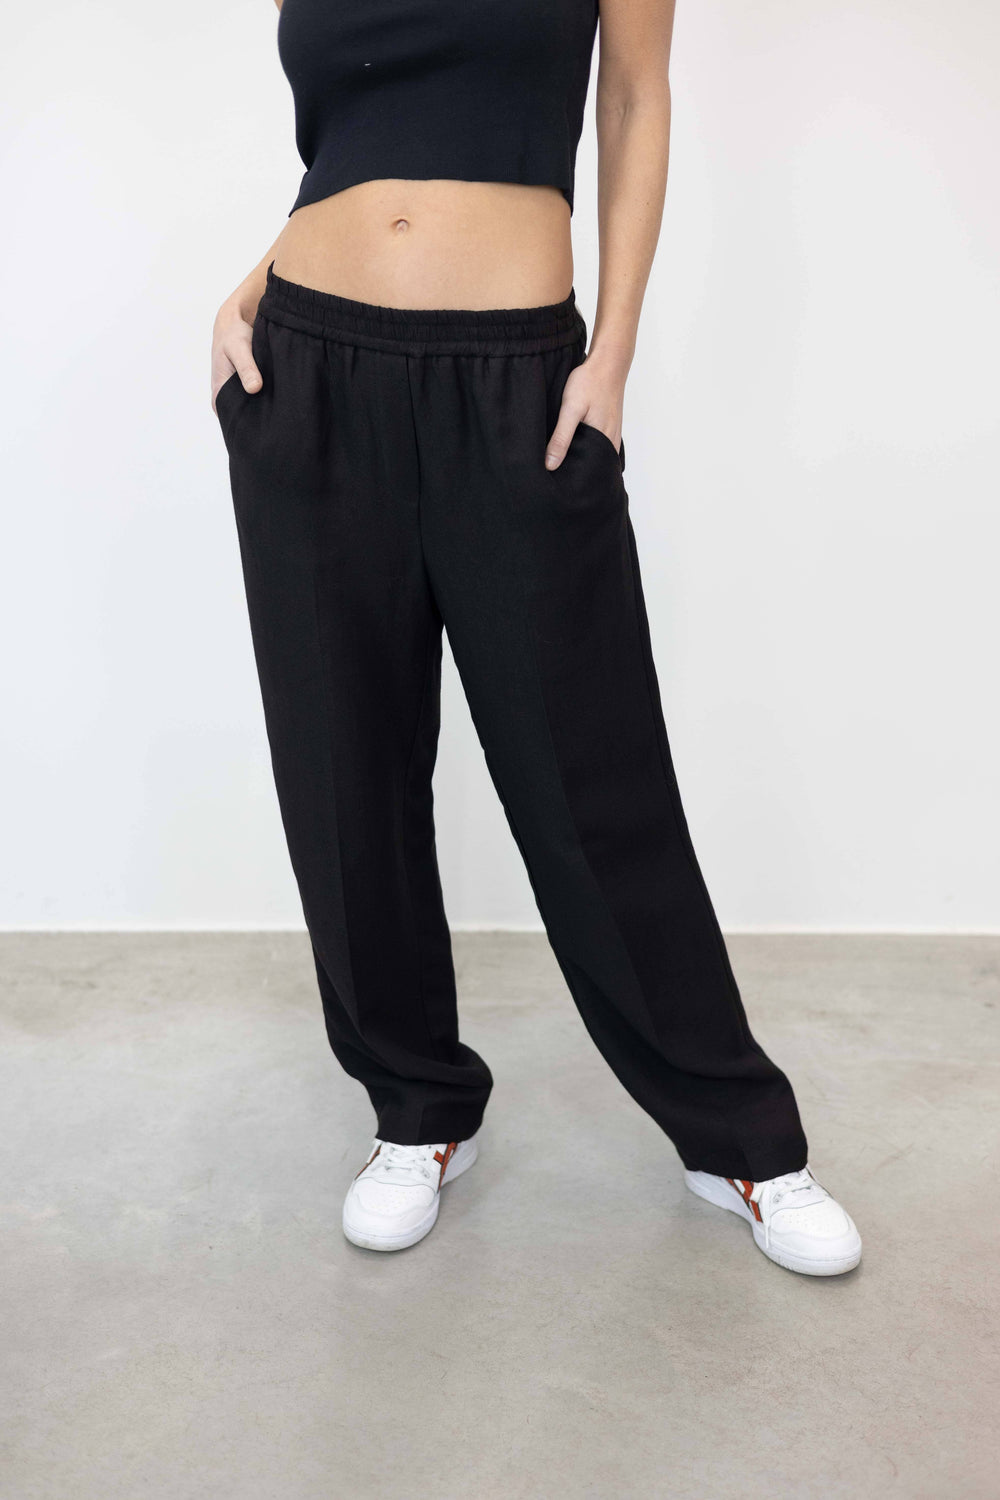 RELAXED FIT STRAIGHT LEG PANTS PANTS NUDE 